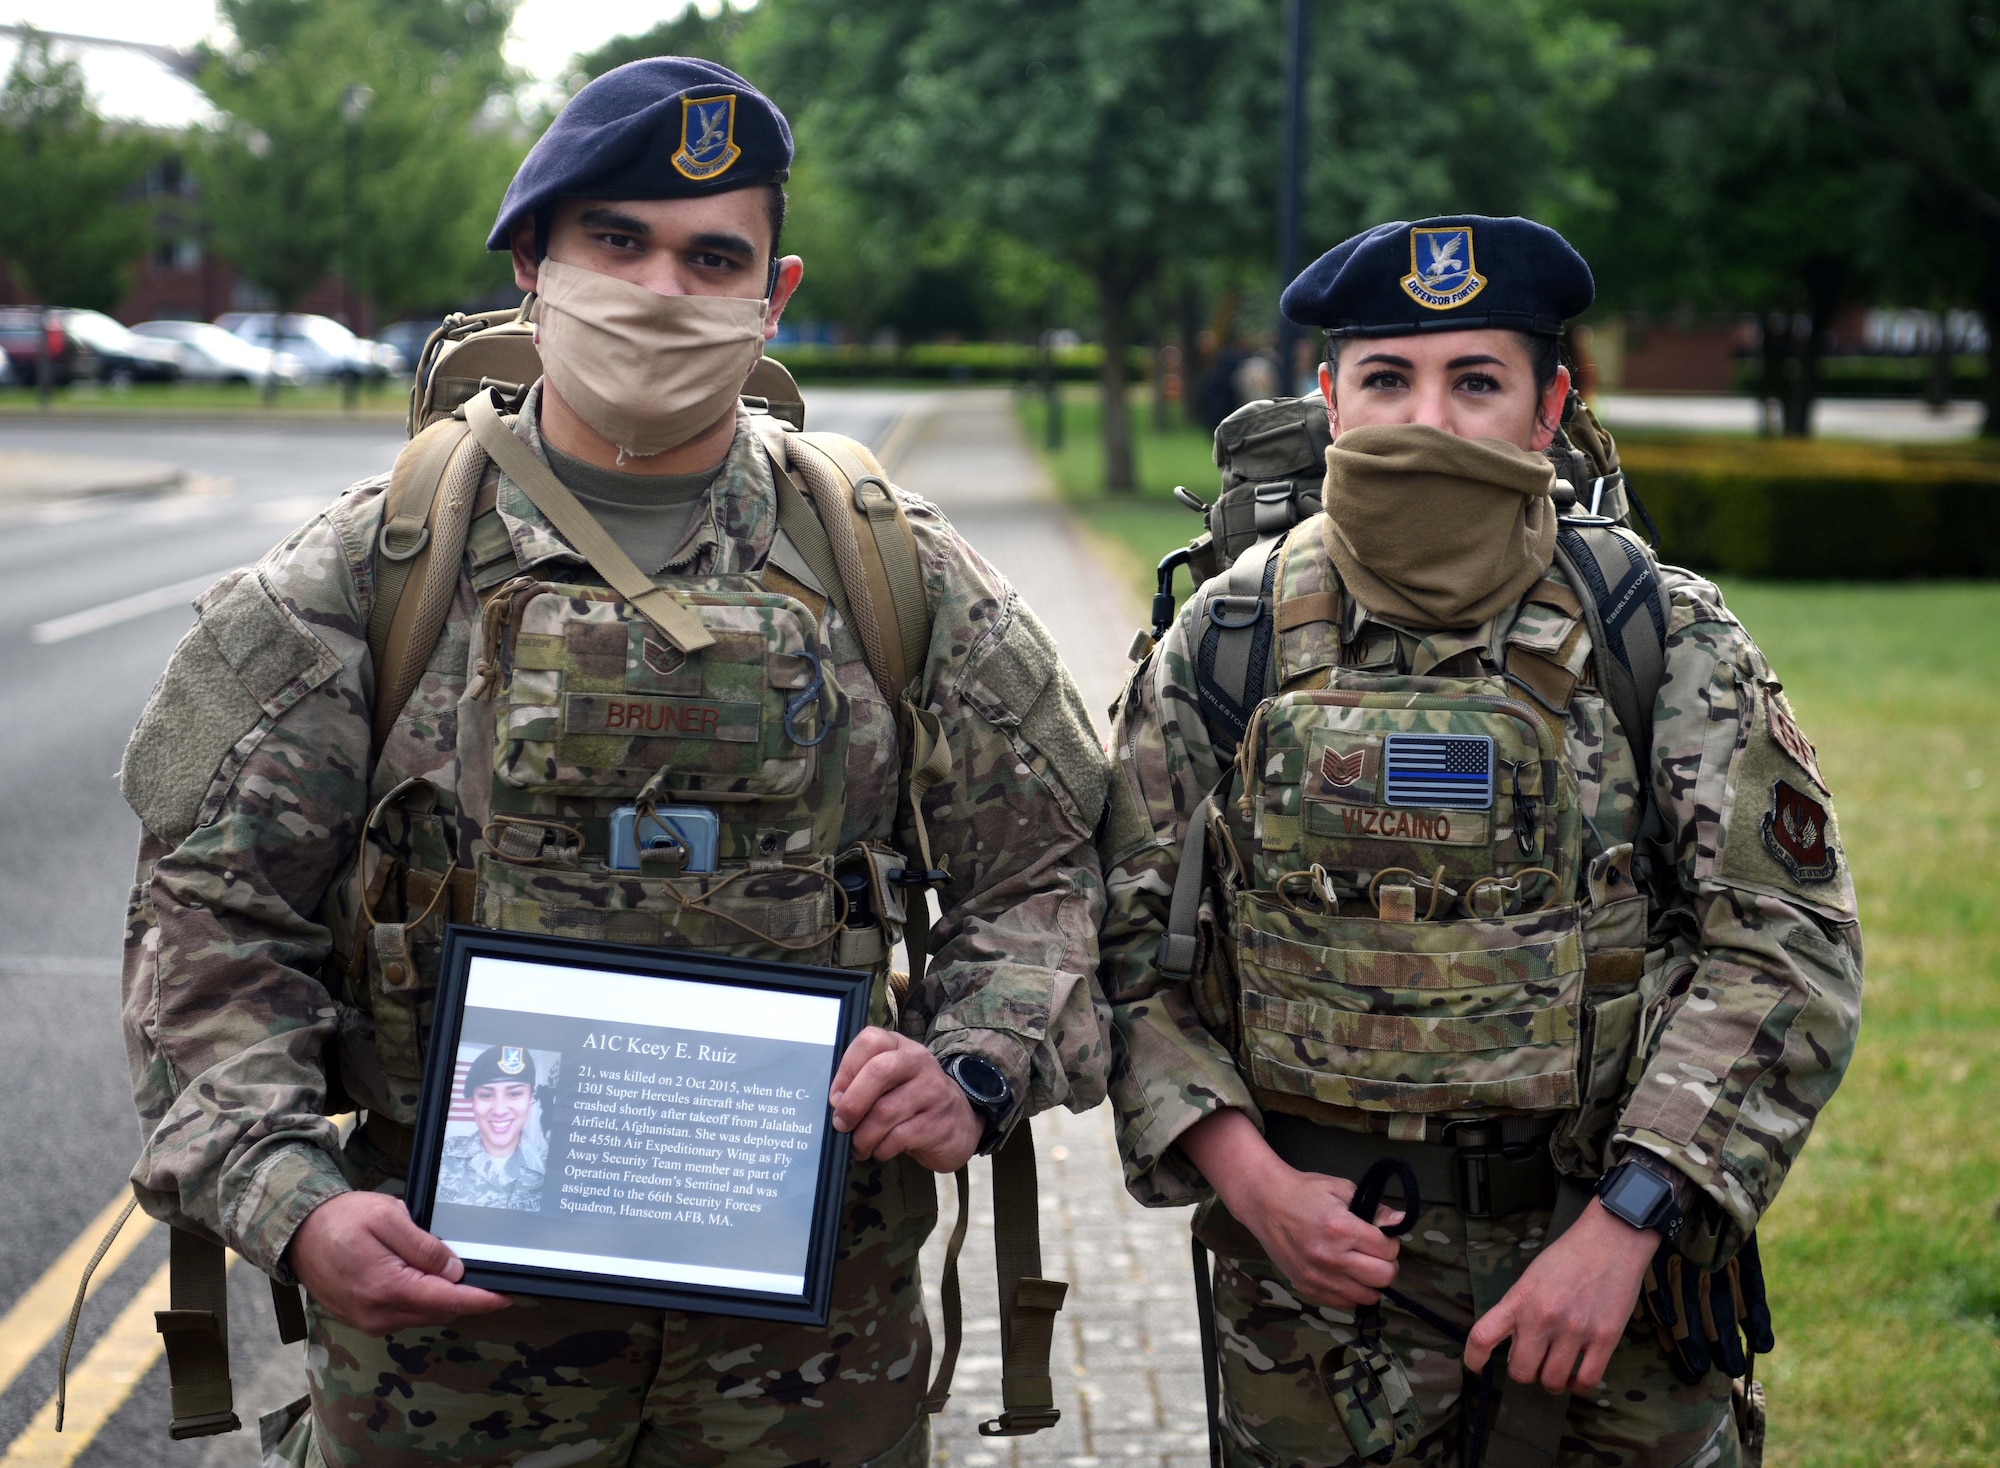 Staff Sgt. Anthony Bruner, 100th Security Forces Squadron member, and Tech. Sgt. Jessica Vizcaino, 100th SFS flight chief, pose with a photo of Airman 1st Class Kcey Ruiz during the 100th SFS Memorial Ruck March at RAF Mildenhall, England, May 13, 2020. Ruiz, a former security forces Airman, died in 2015 while deployed to Afghanistan in support of Operation Freedom’s Sentinel. (U.S. Air Force photo by Senior Airman Brandon Esau)